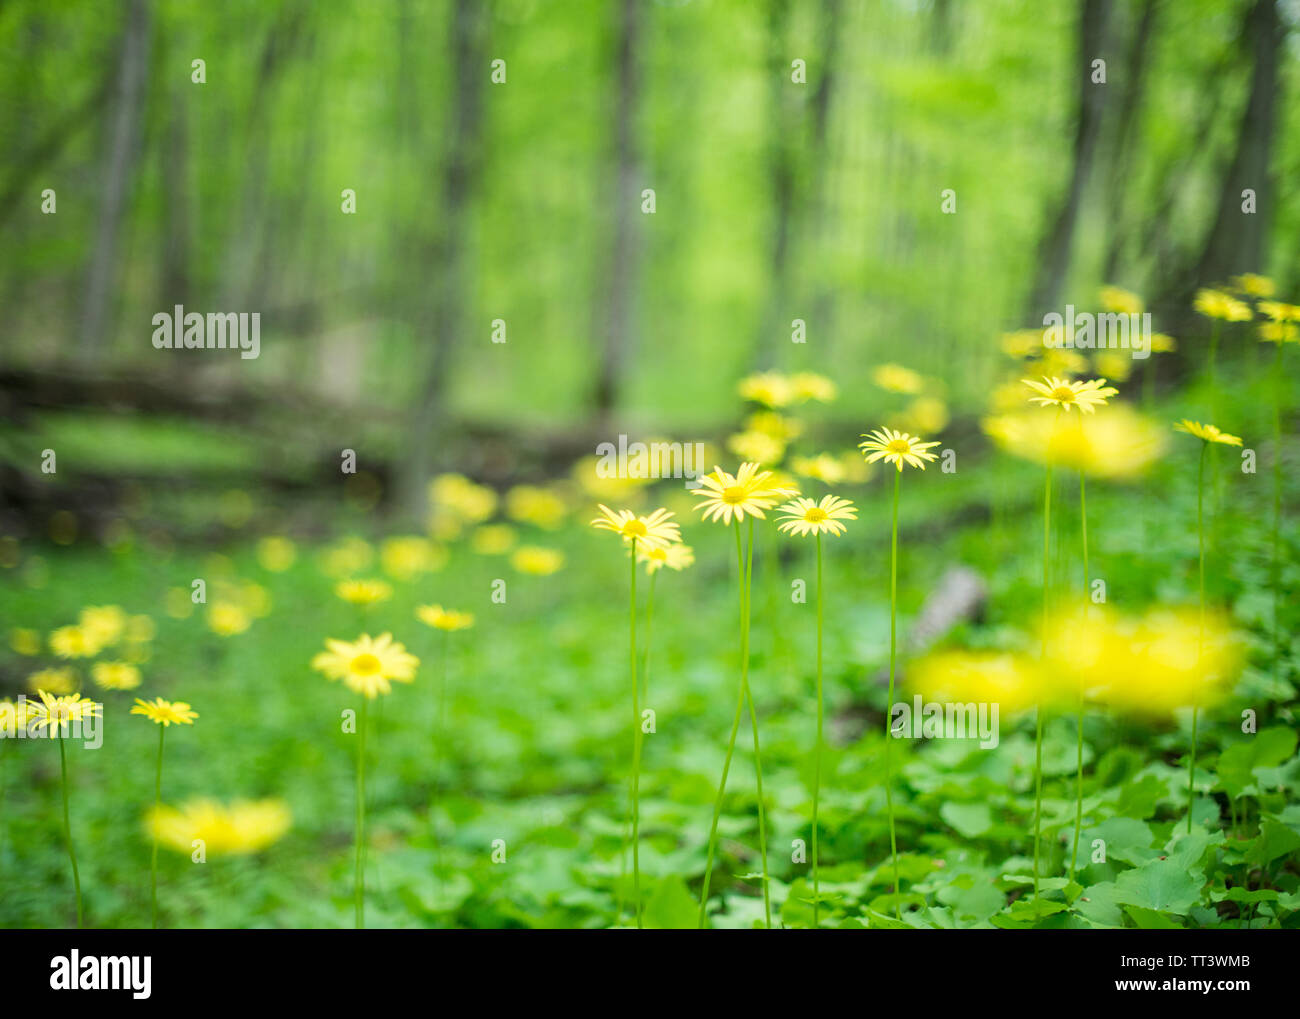 Spring, wild yellow flowers on blurred background. Stock Photo